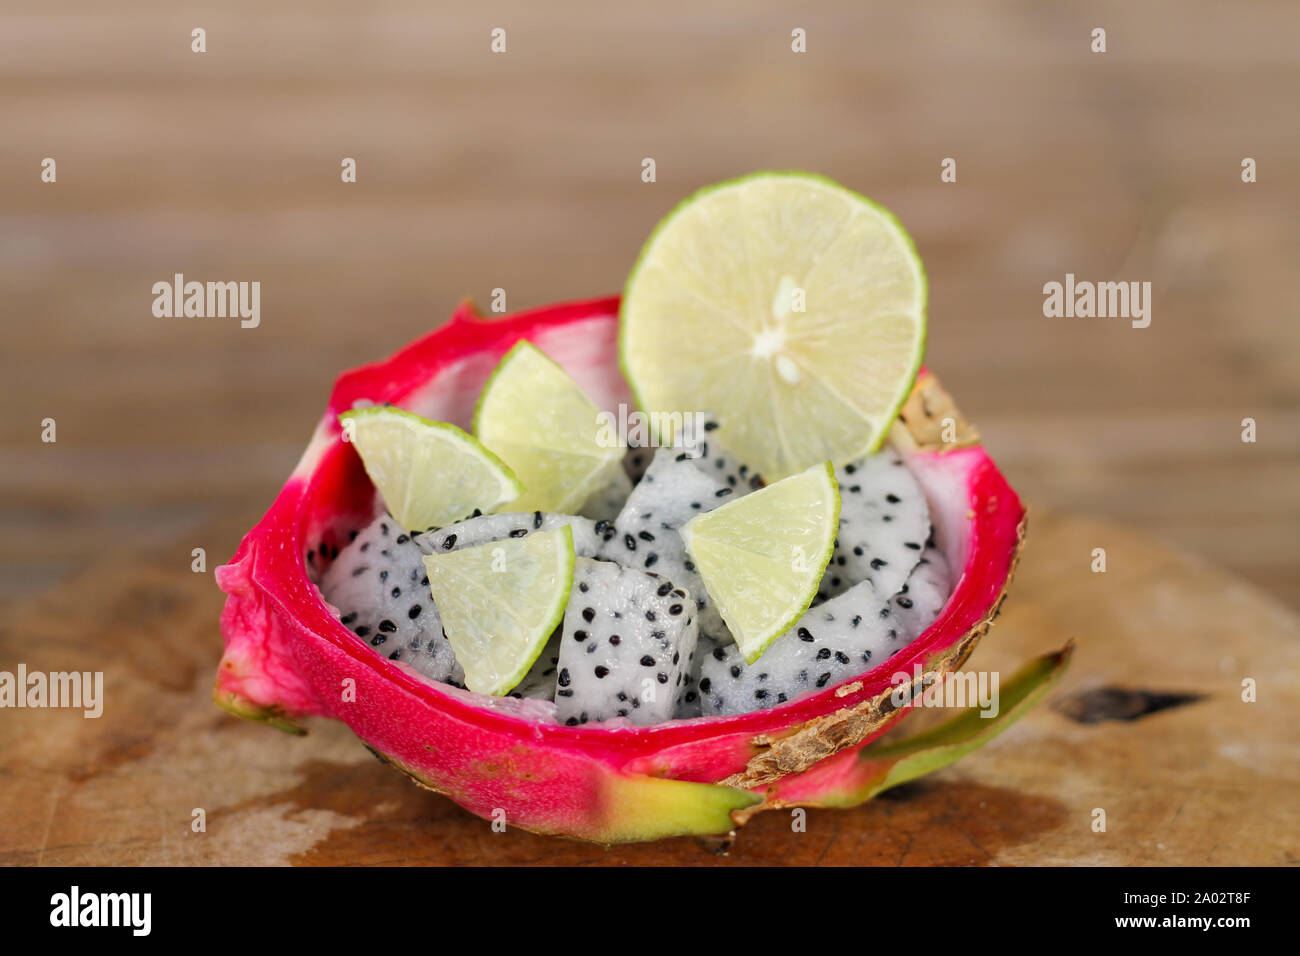 Dragon fruit sliced and lime slice in a haft of dragon fruit peel on old wooden table background. Stock Photo